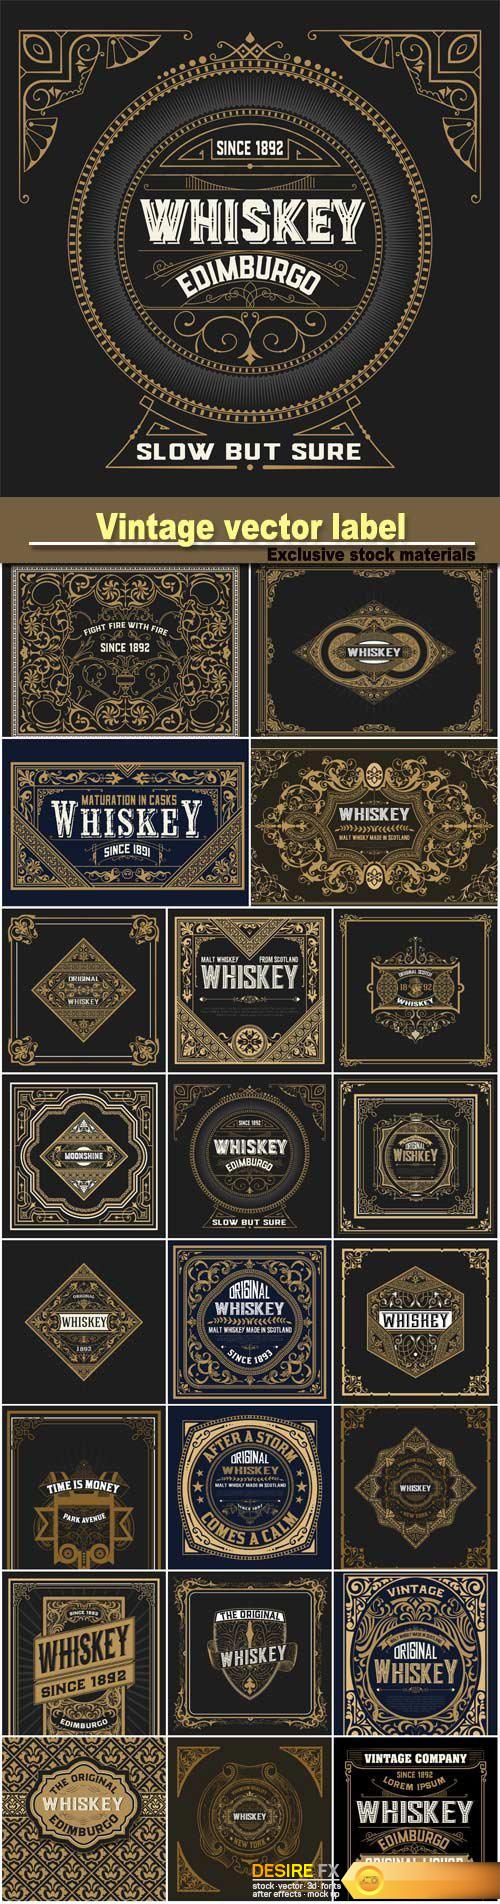 Whiskey Label Vector at Vectorified.com | Collection of Whiskey Label ...